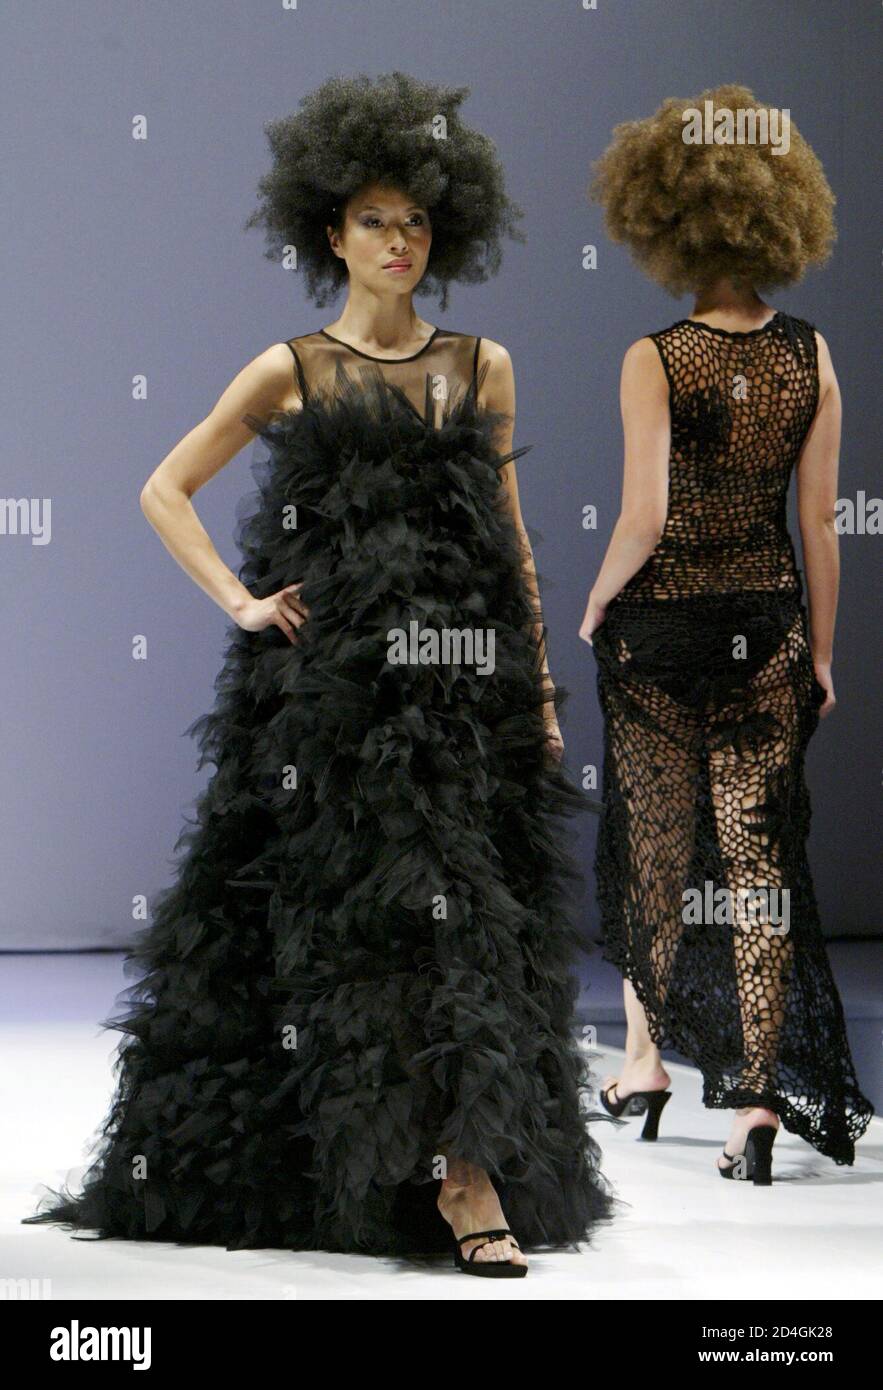 Models present creations by Hong Kong fashion designer William Tang at the Hong Kong Fashion Week Fall/Winter 2004 show in Hong Kong January 14, 2004. [Hong Kong Fashion Week and the fashion fair 'World Boutique' invited 190 exhibitors offering over 300 brand names and designers from Australia, Canada, Mainland China, France, Germany, India, Indonesia, Italy, Macau, Malaysia, Korea, Singapore, Taiwan, Thailand and United States.] Stock Photo